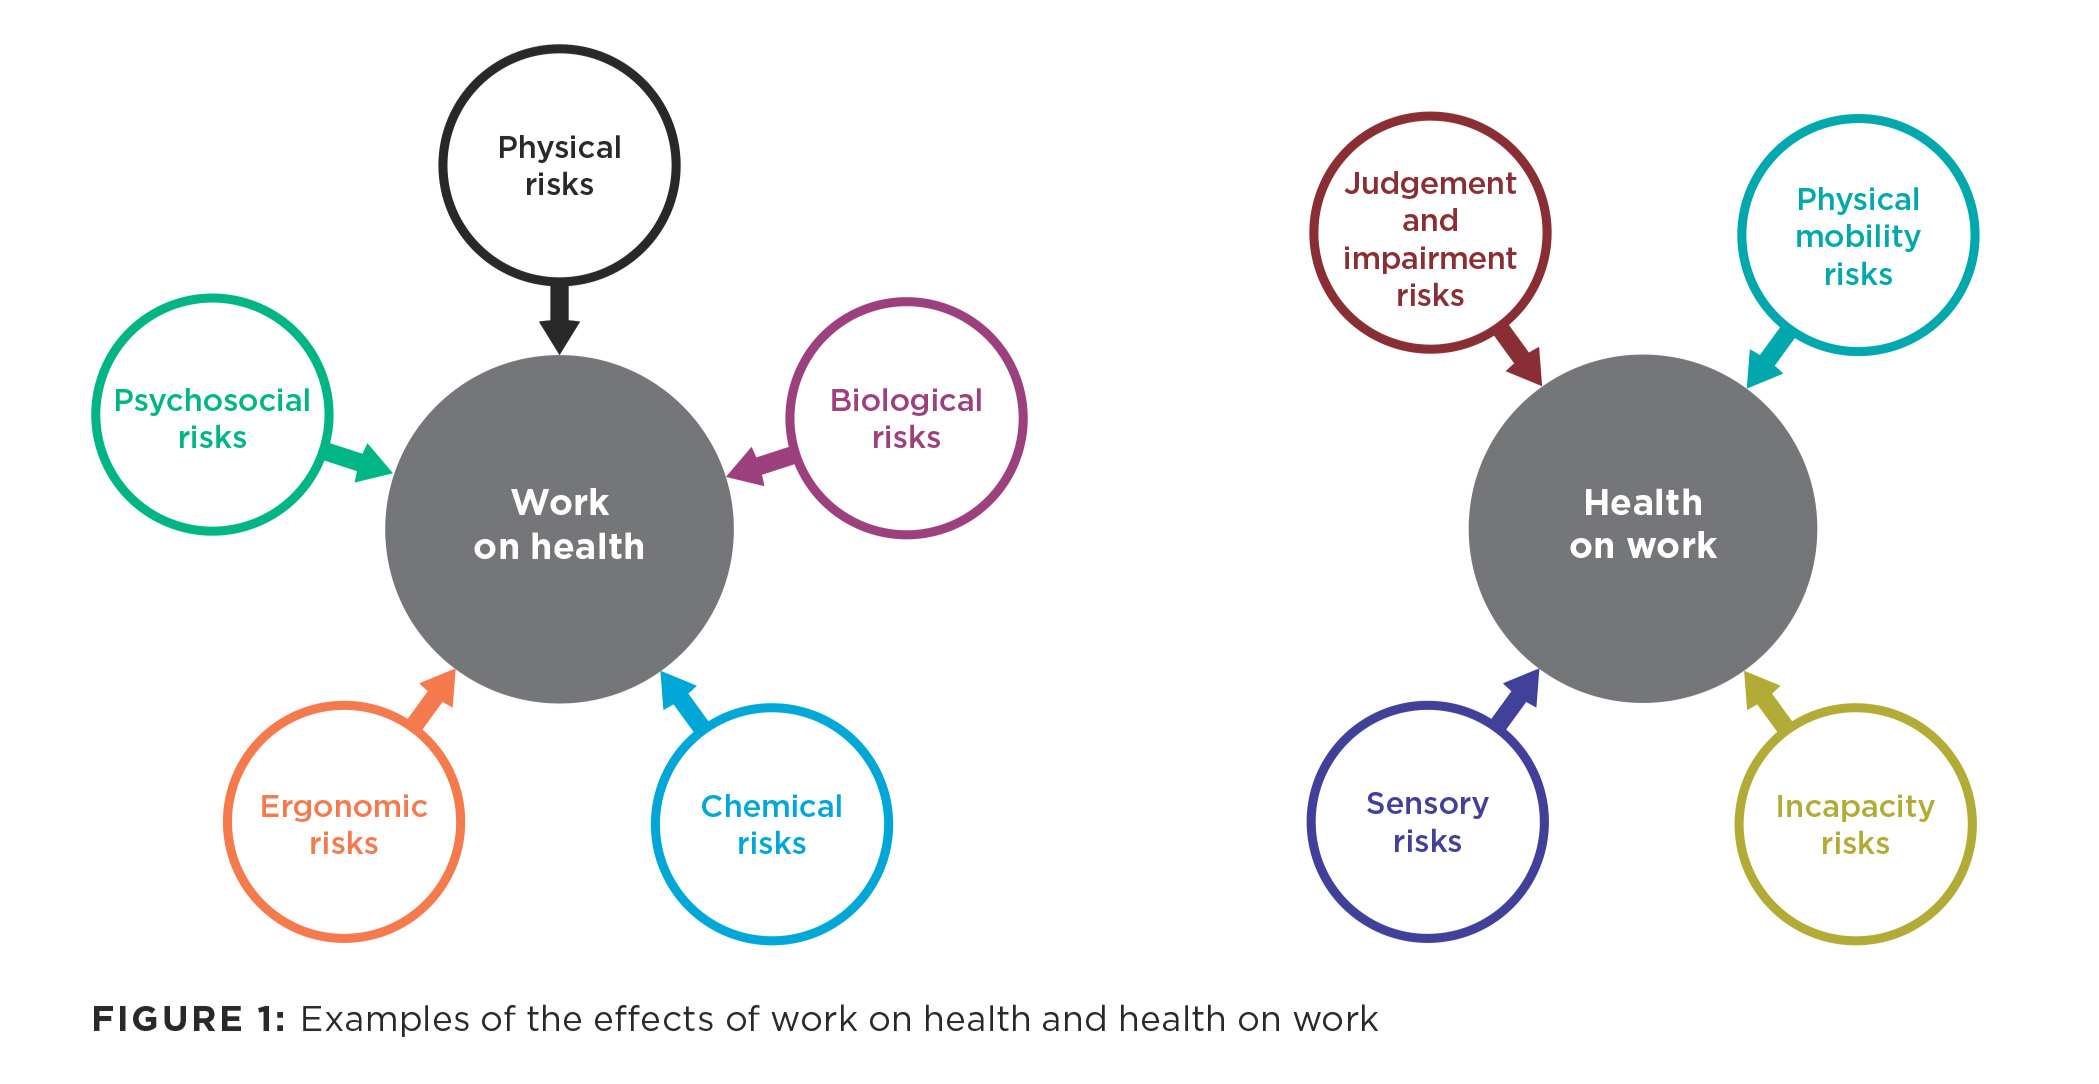 [image] Examples of the effects of work on health and health on work